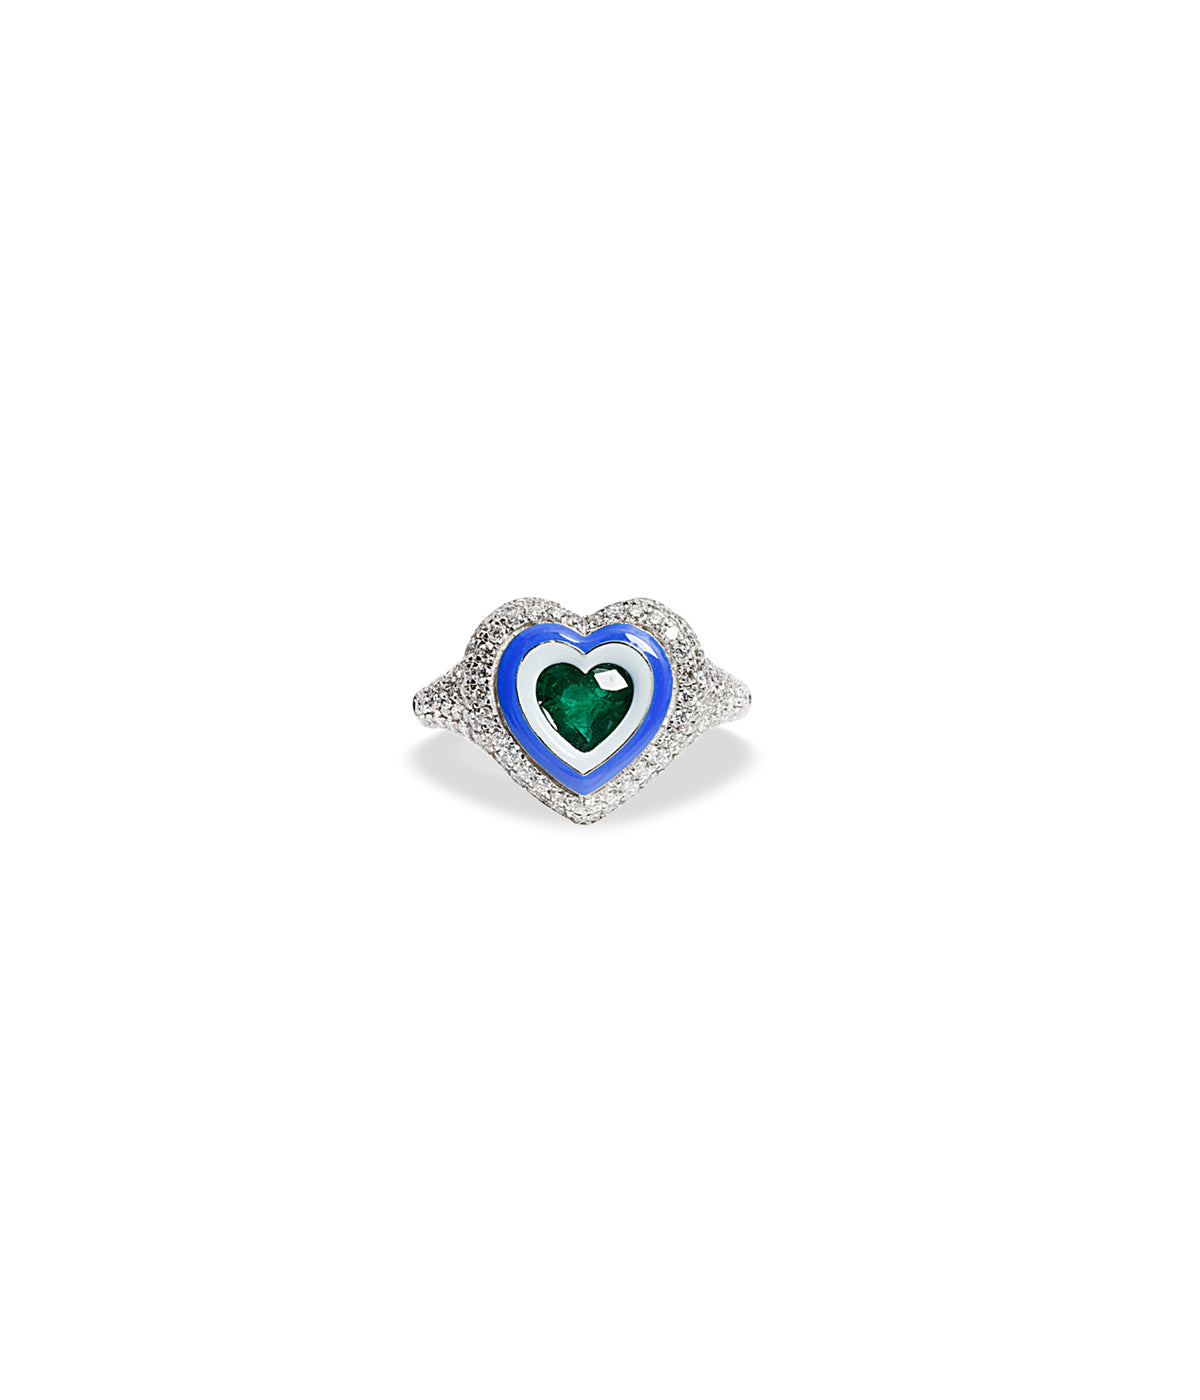 Dual Toned Oasis Heart 18k white gold, diamond and emerald pinky ring